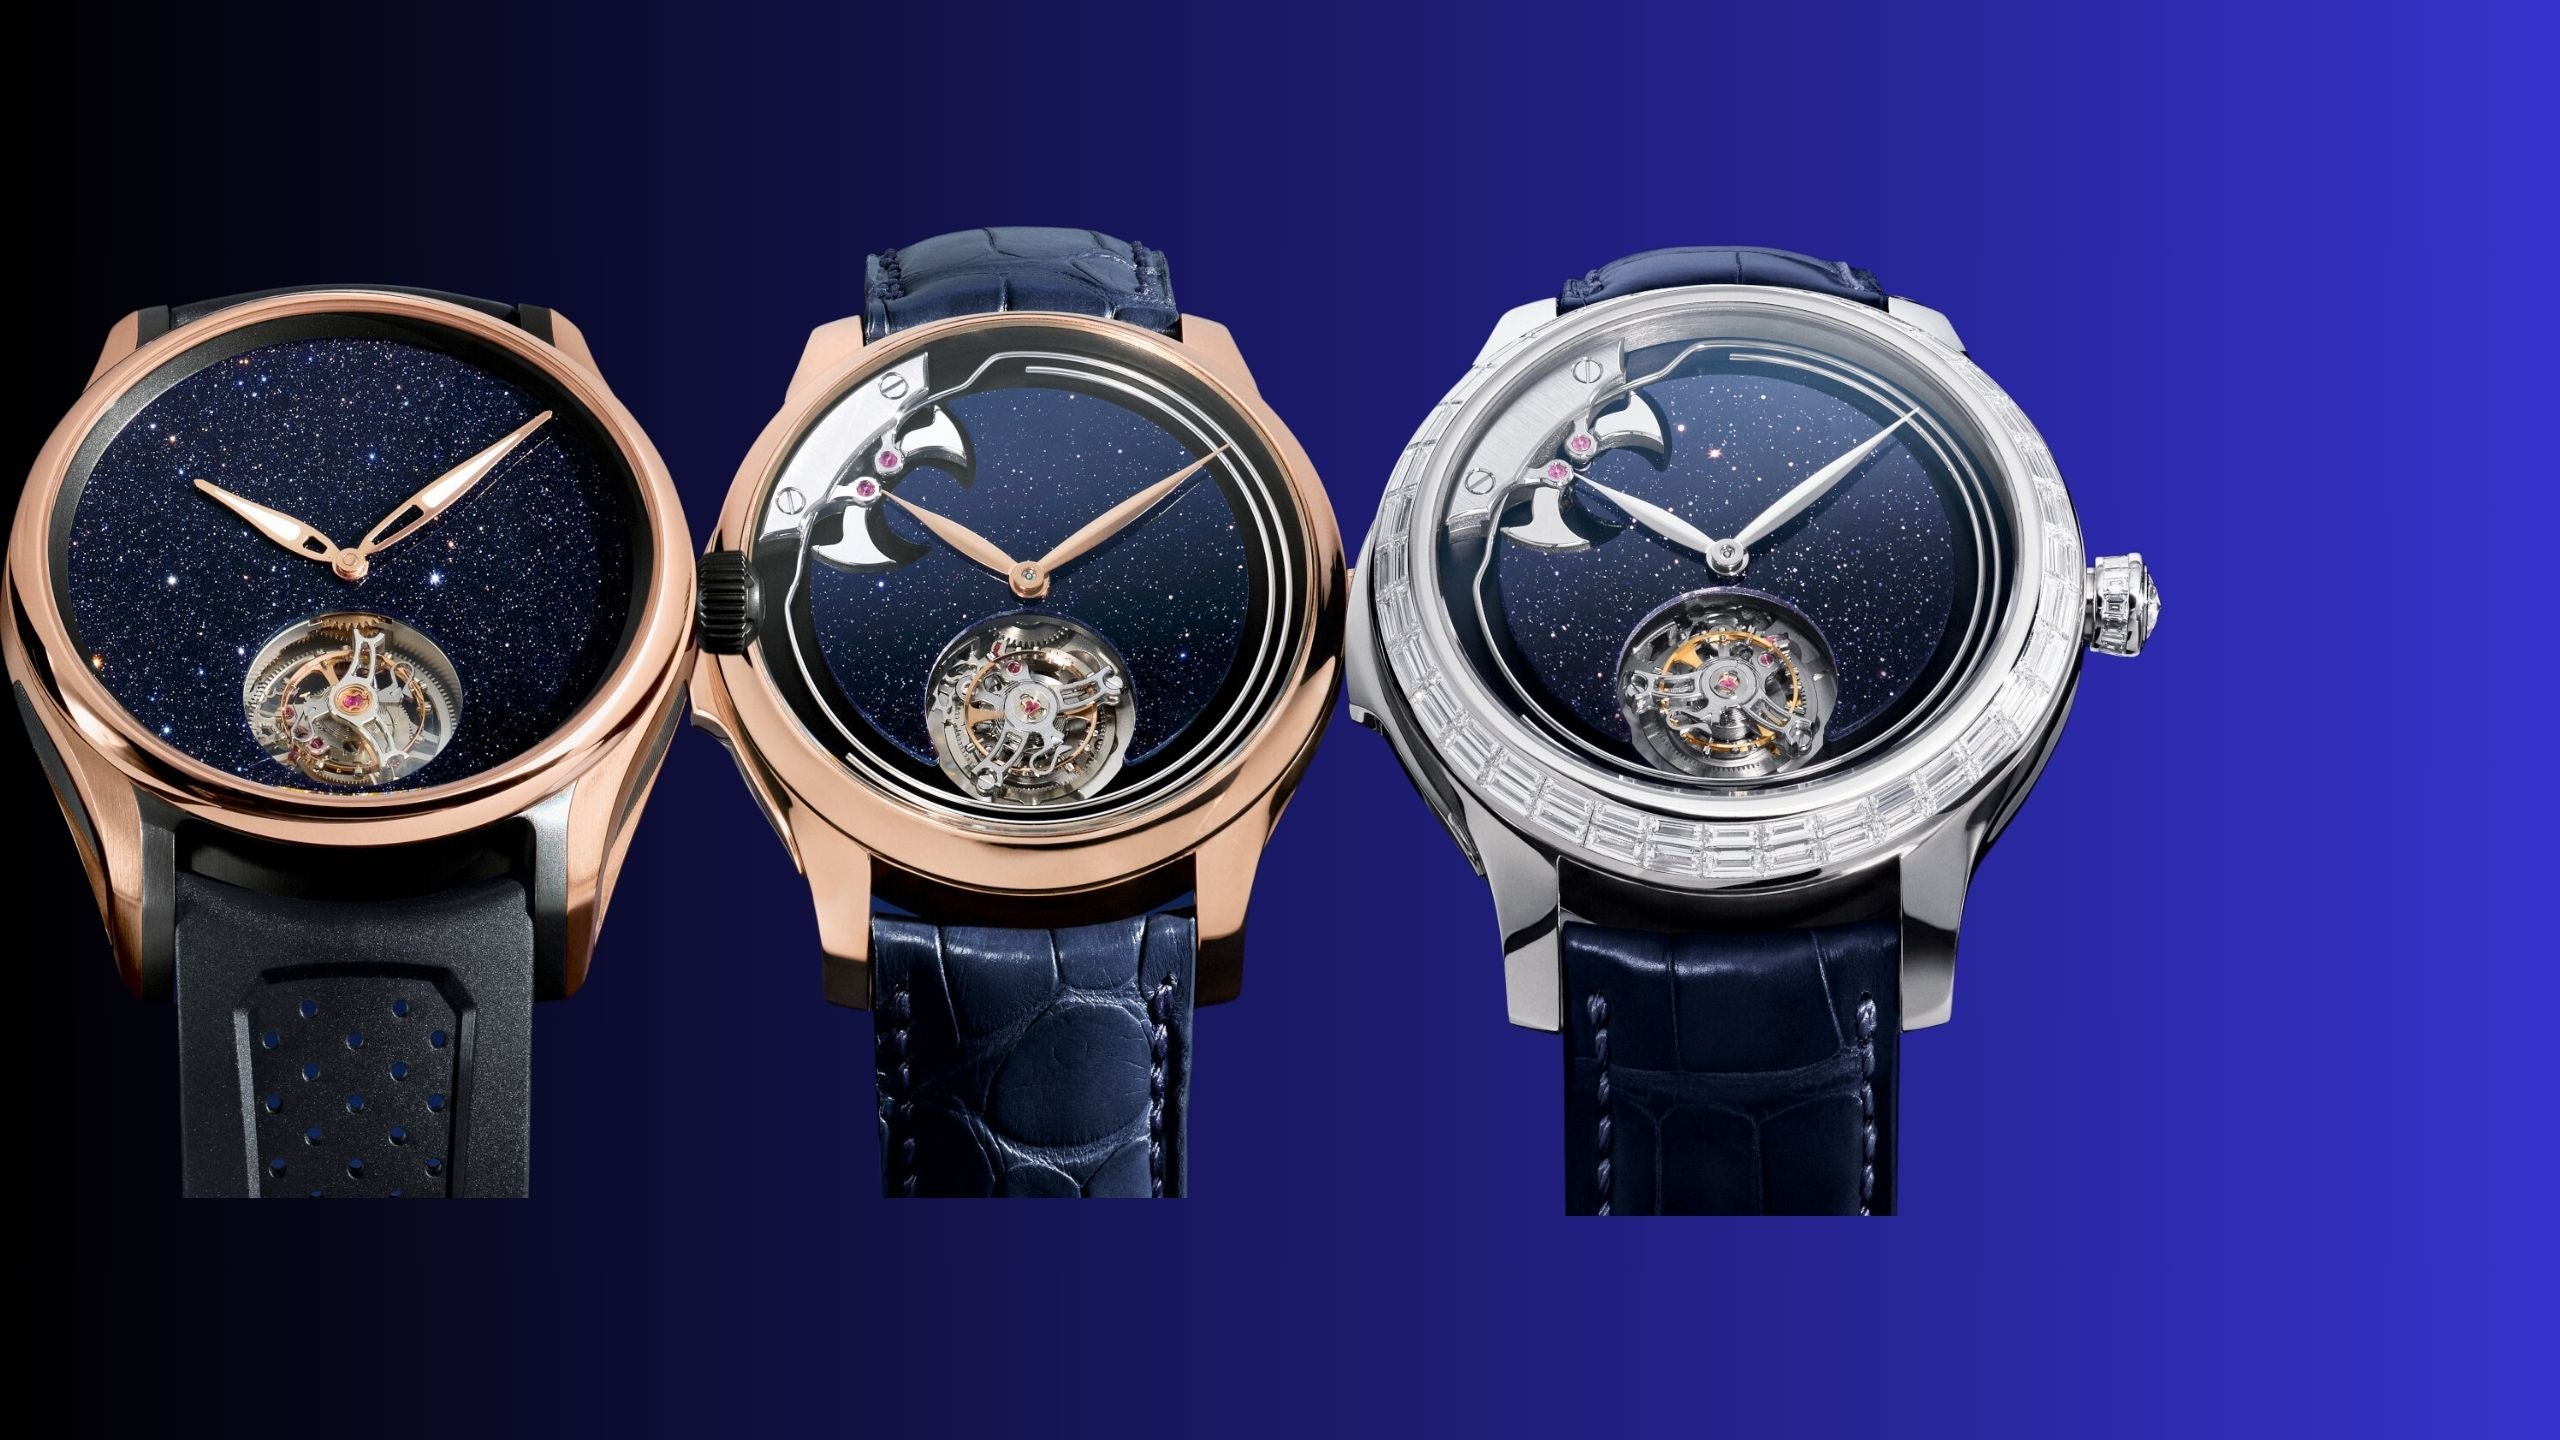 Trio of heavy hitters by H. Moser & Cie in collaboration with Bucherer